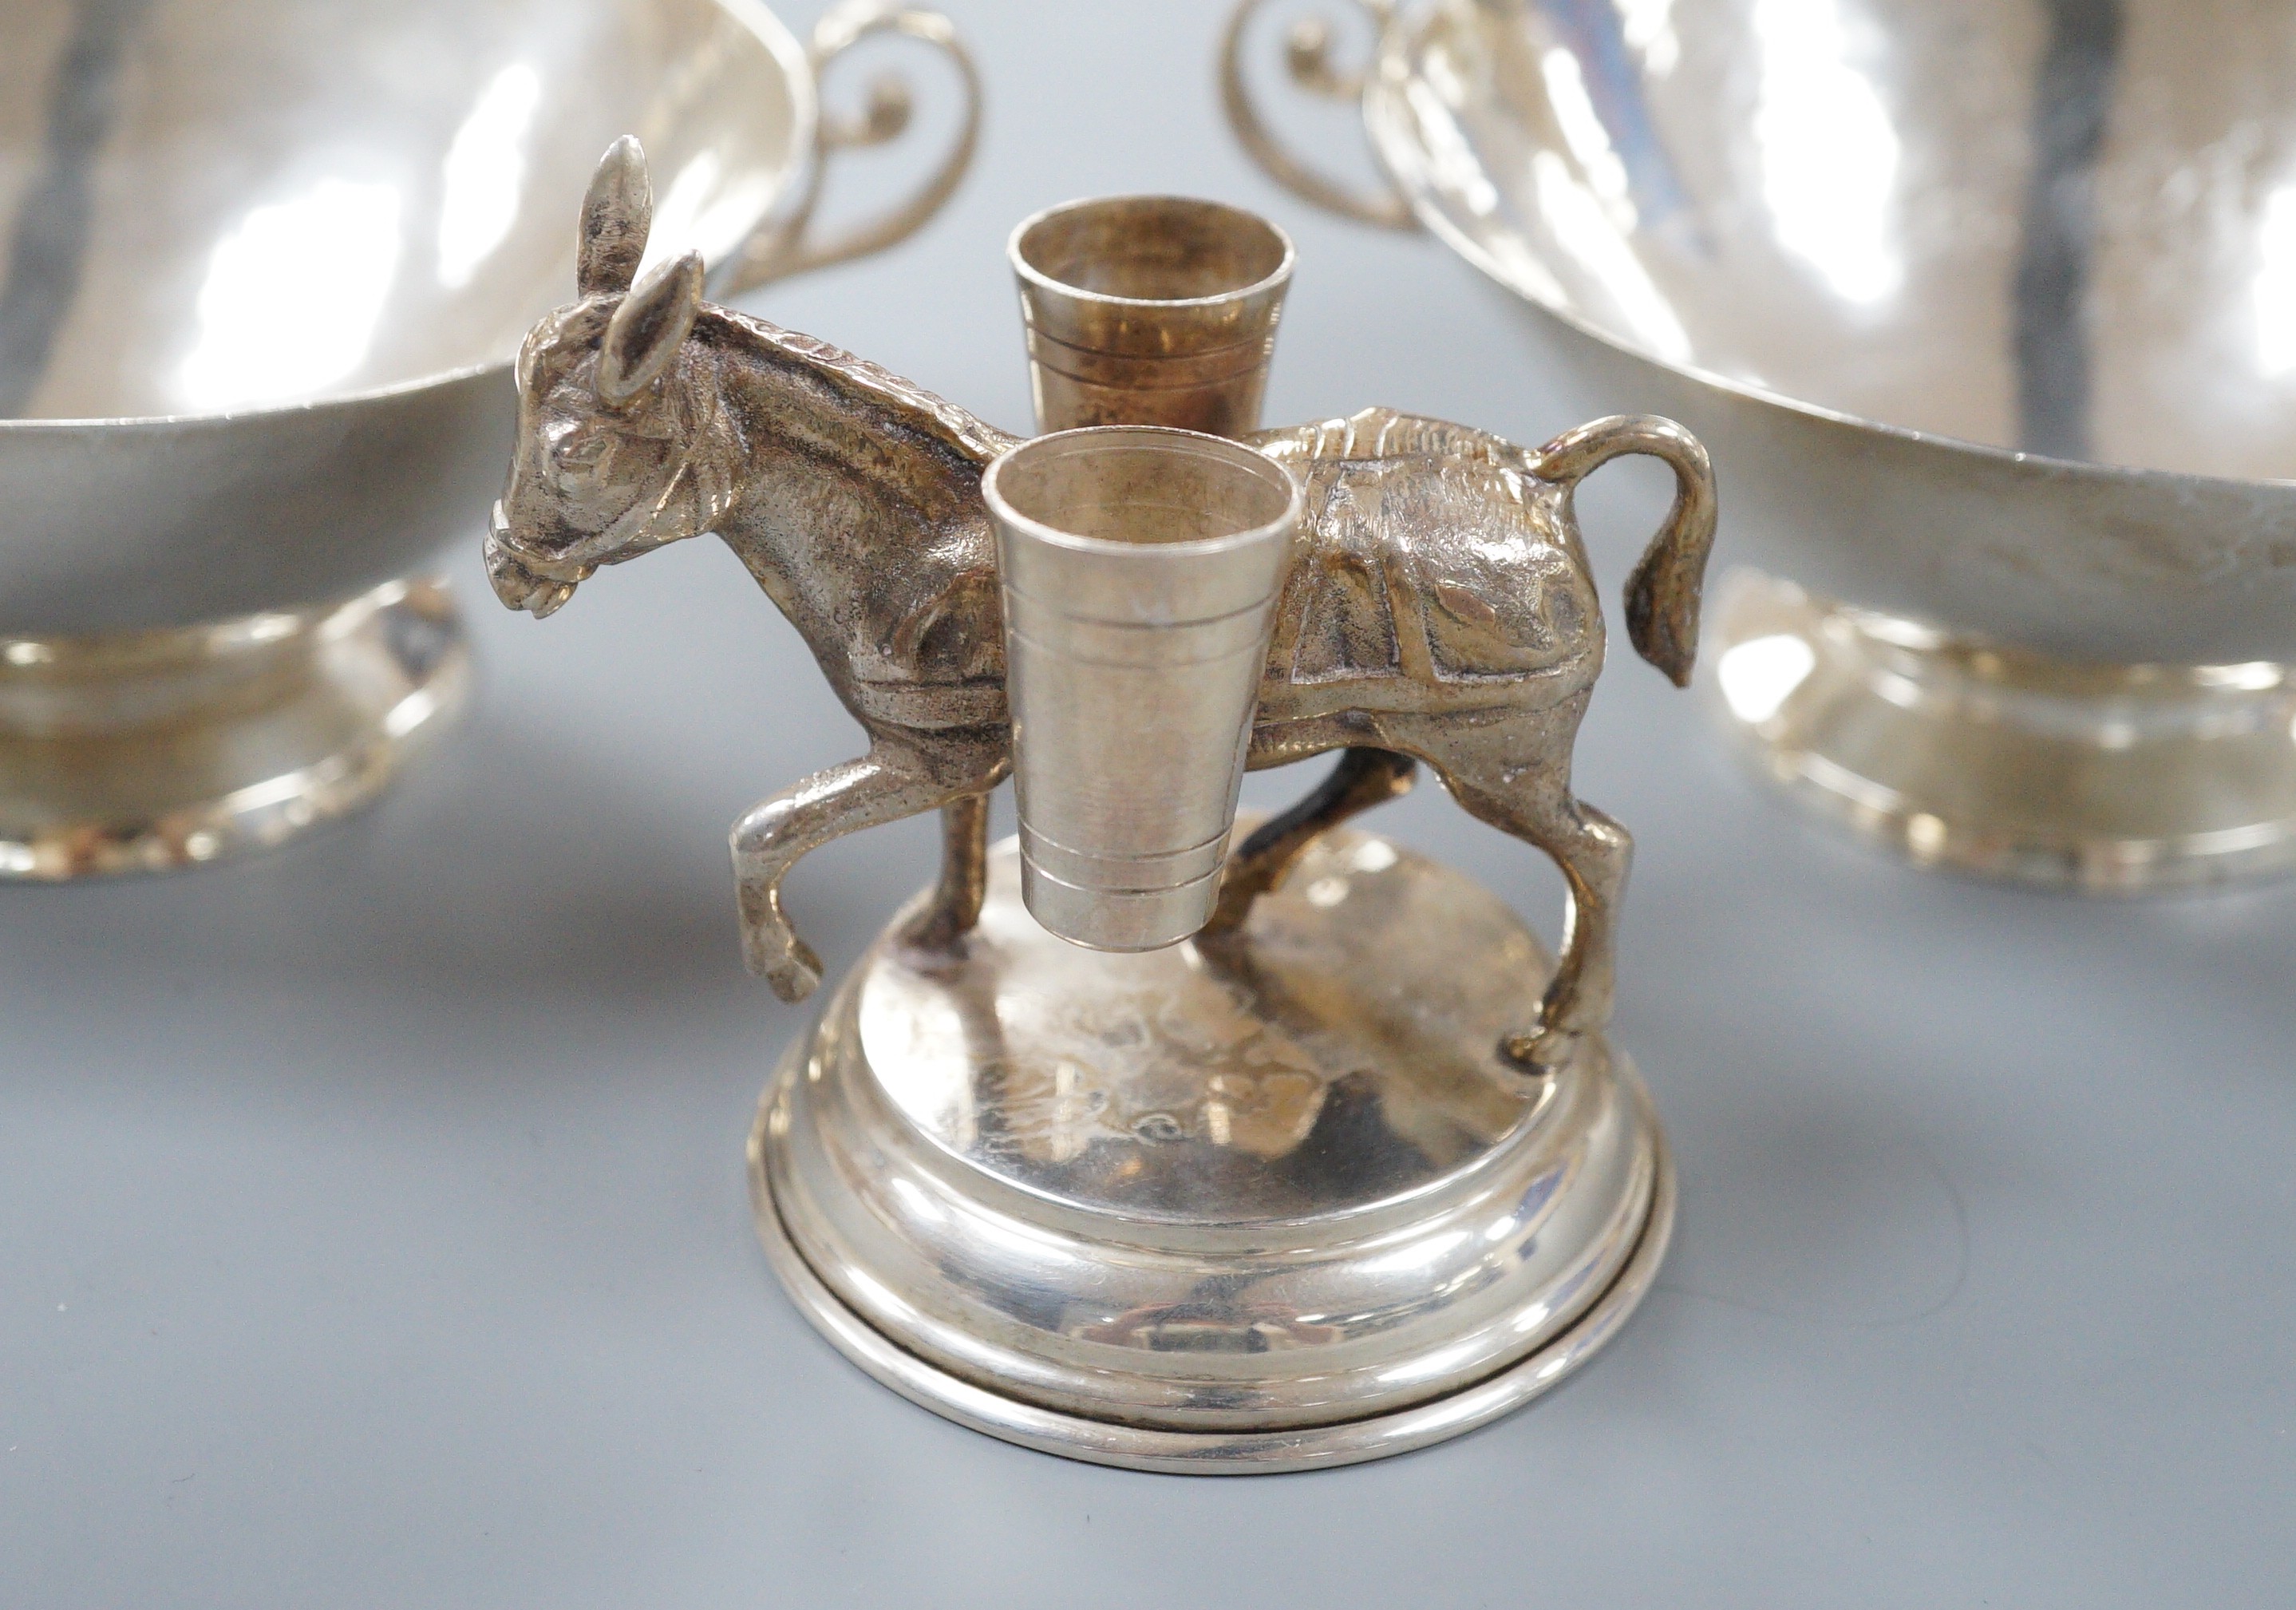 Two Chilean Hecho Amano 900 standard white metal two handle finger bowls, diameter 13.5cm and a Spanish white metal donkey vesta vase, 68mm.